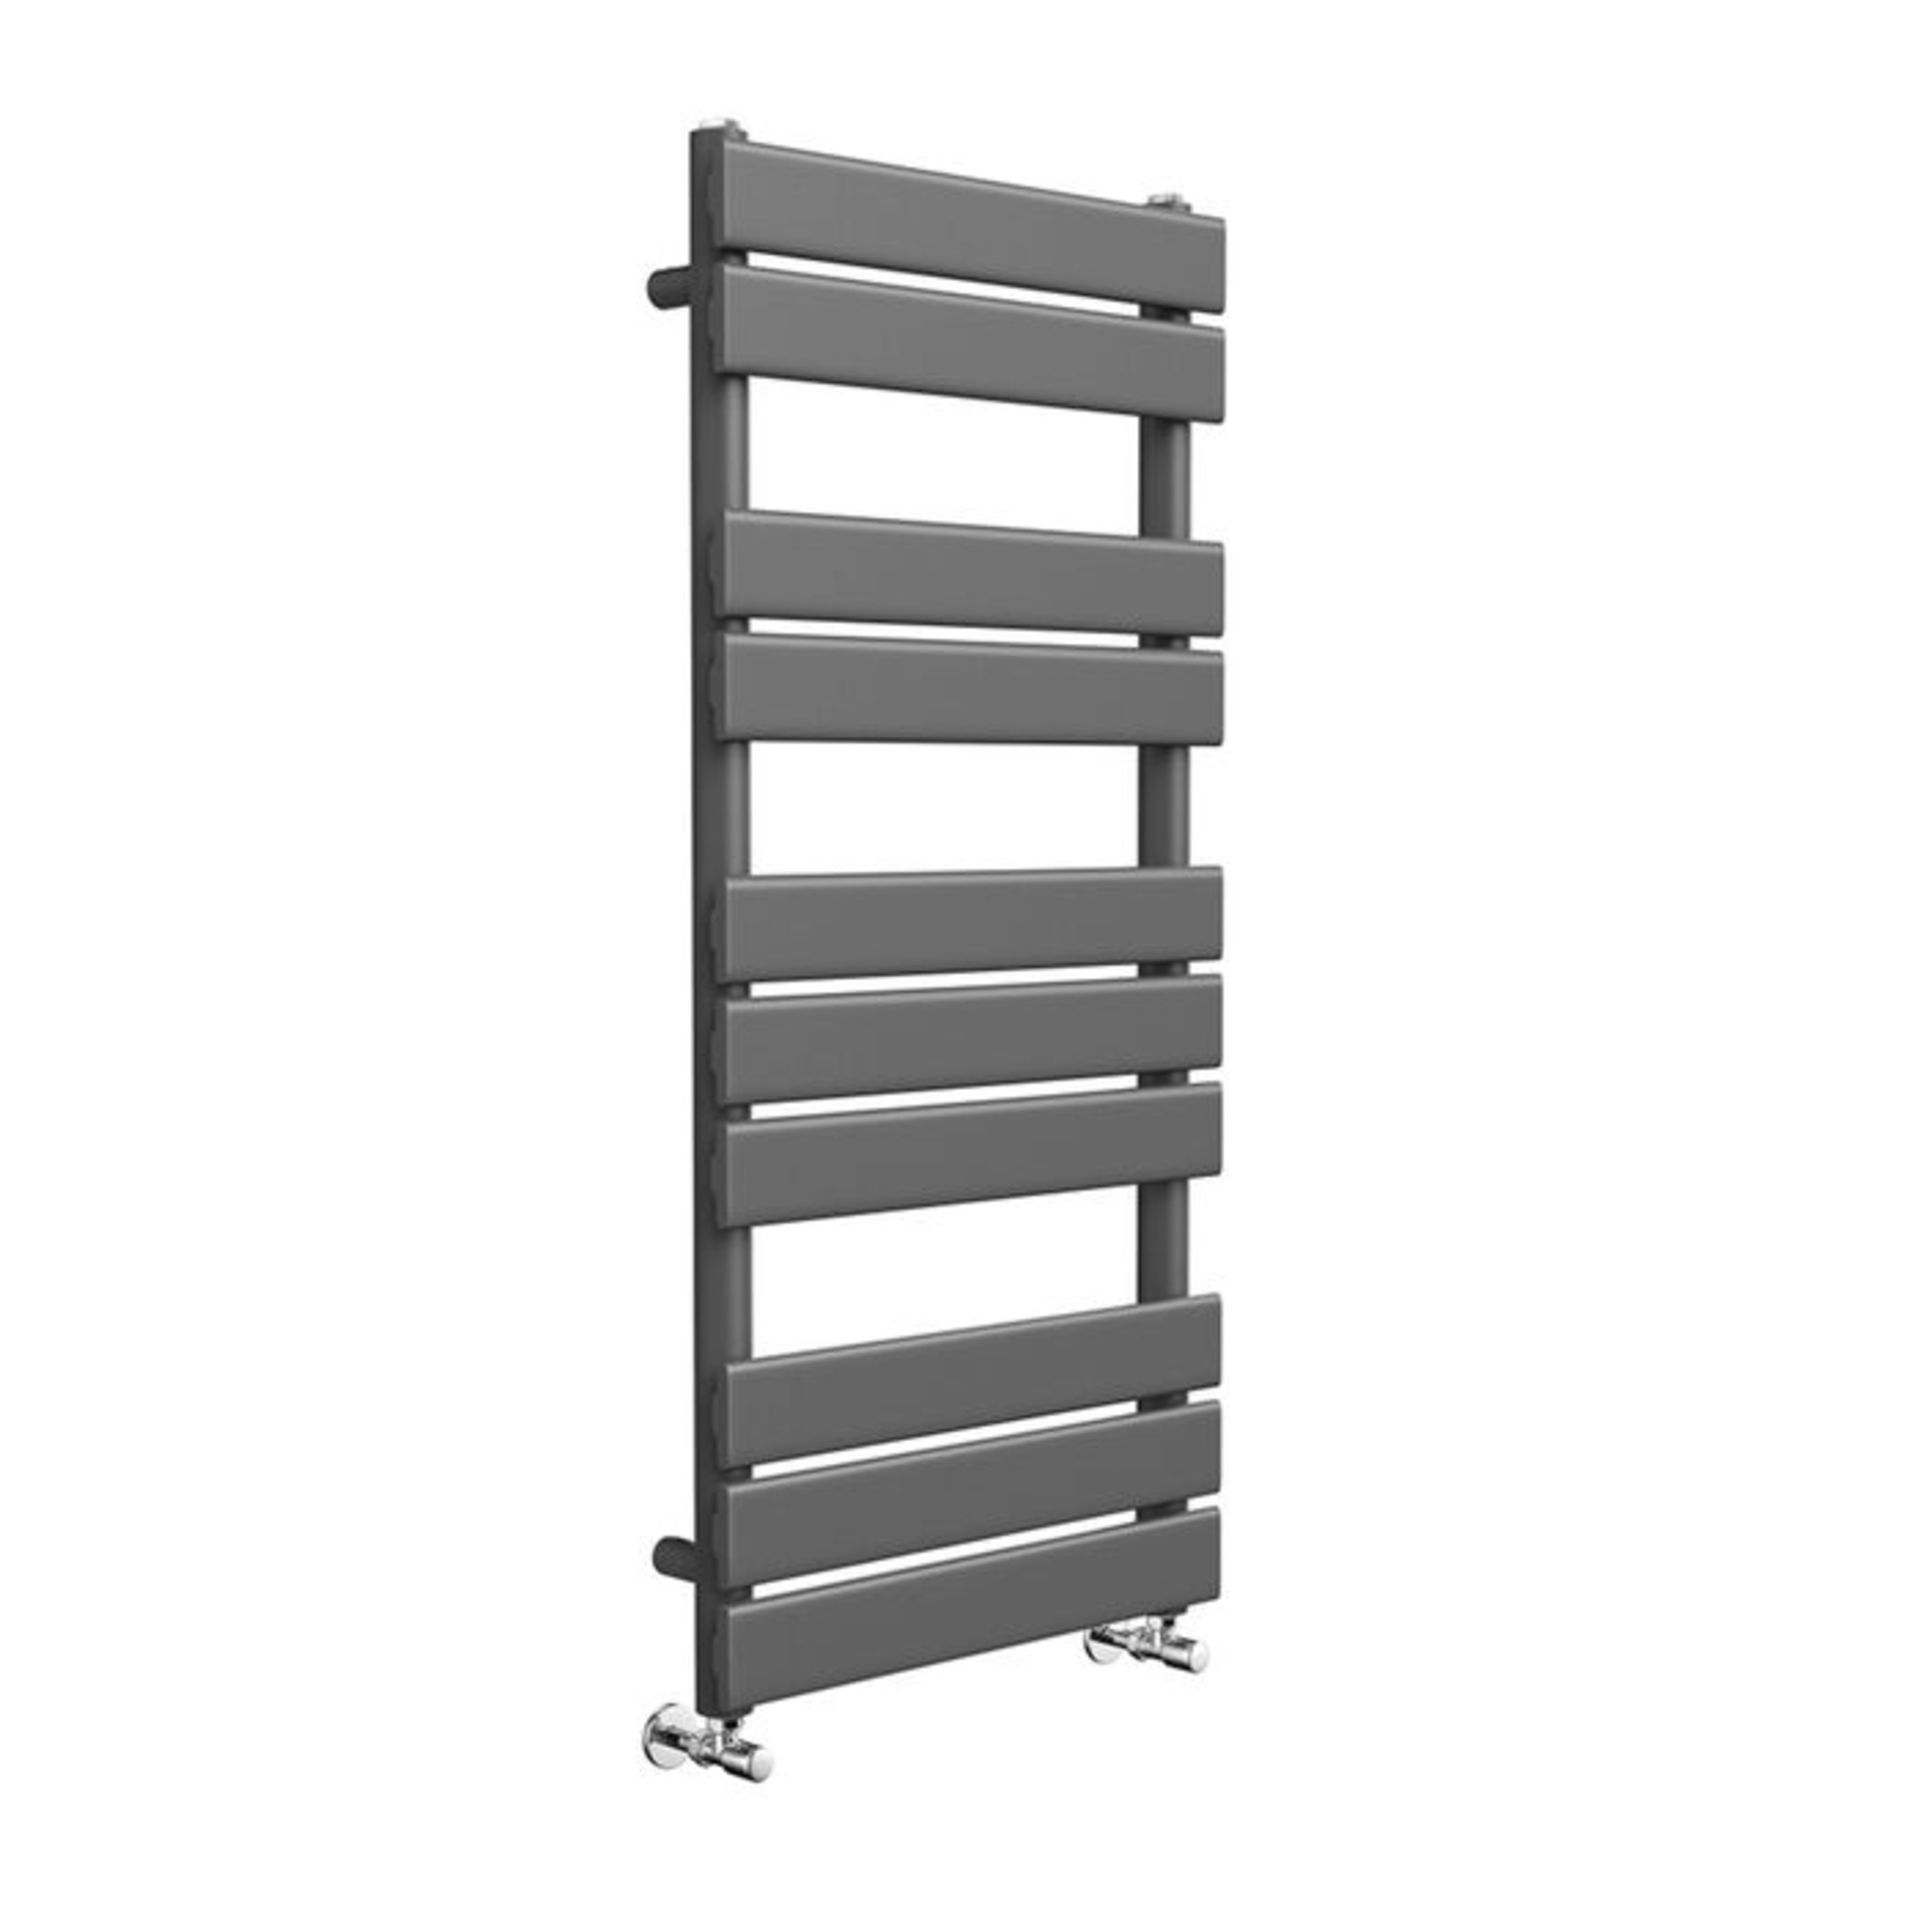 (AA48) 1000x450mm Anthracite Flat Panel Ladder Towel Radiator. RRP £359.99. Incredibly trendy ... - Image 3 of 3